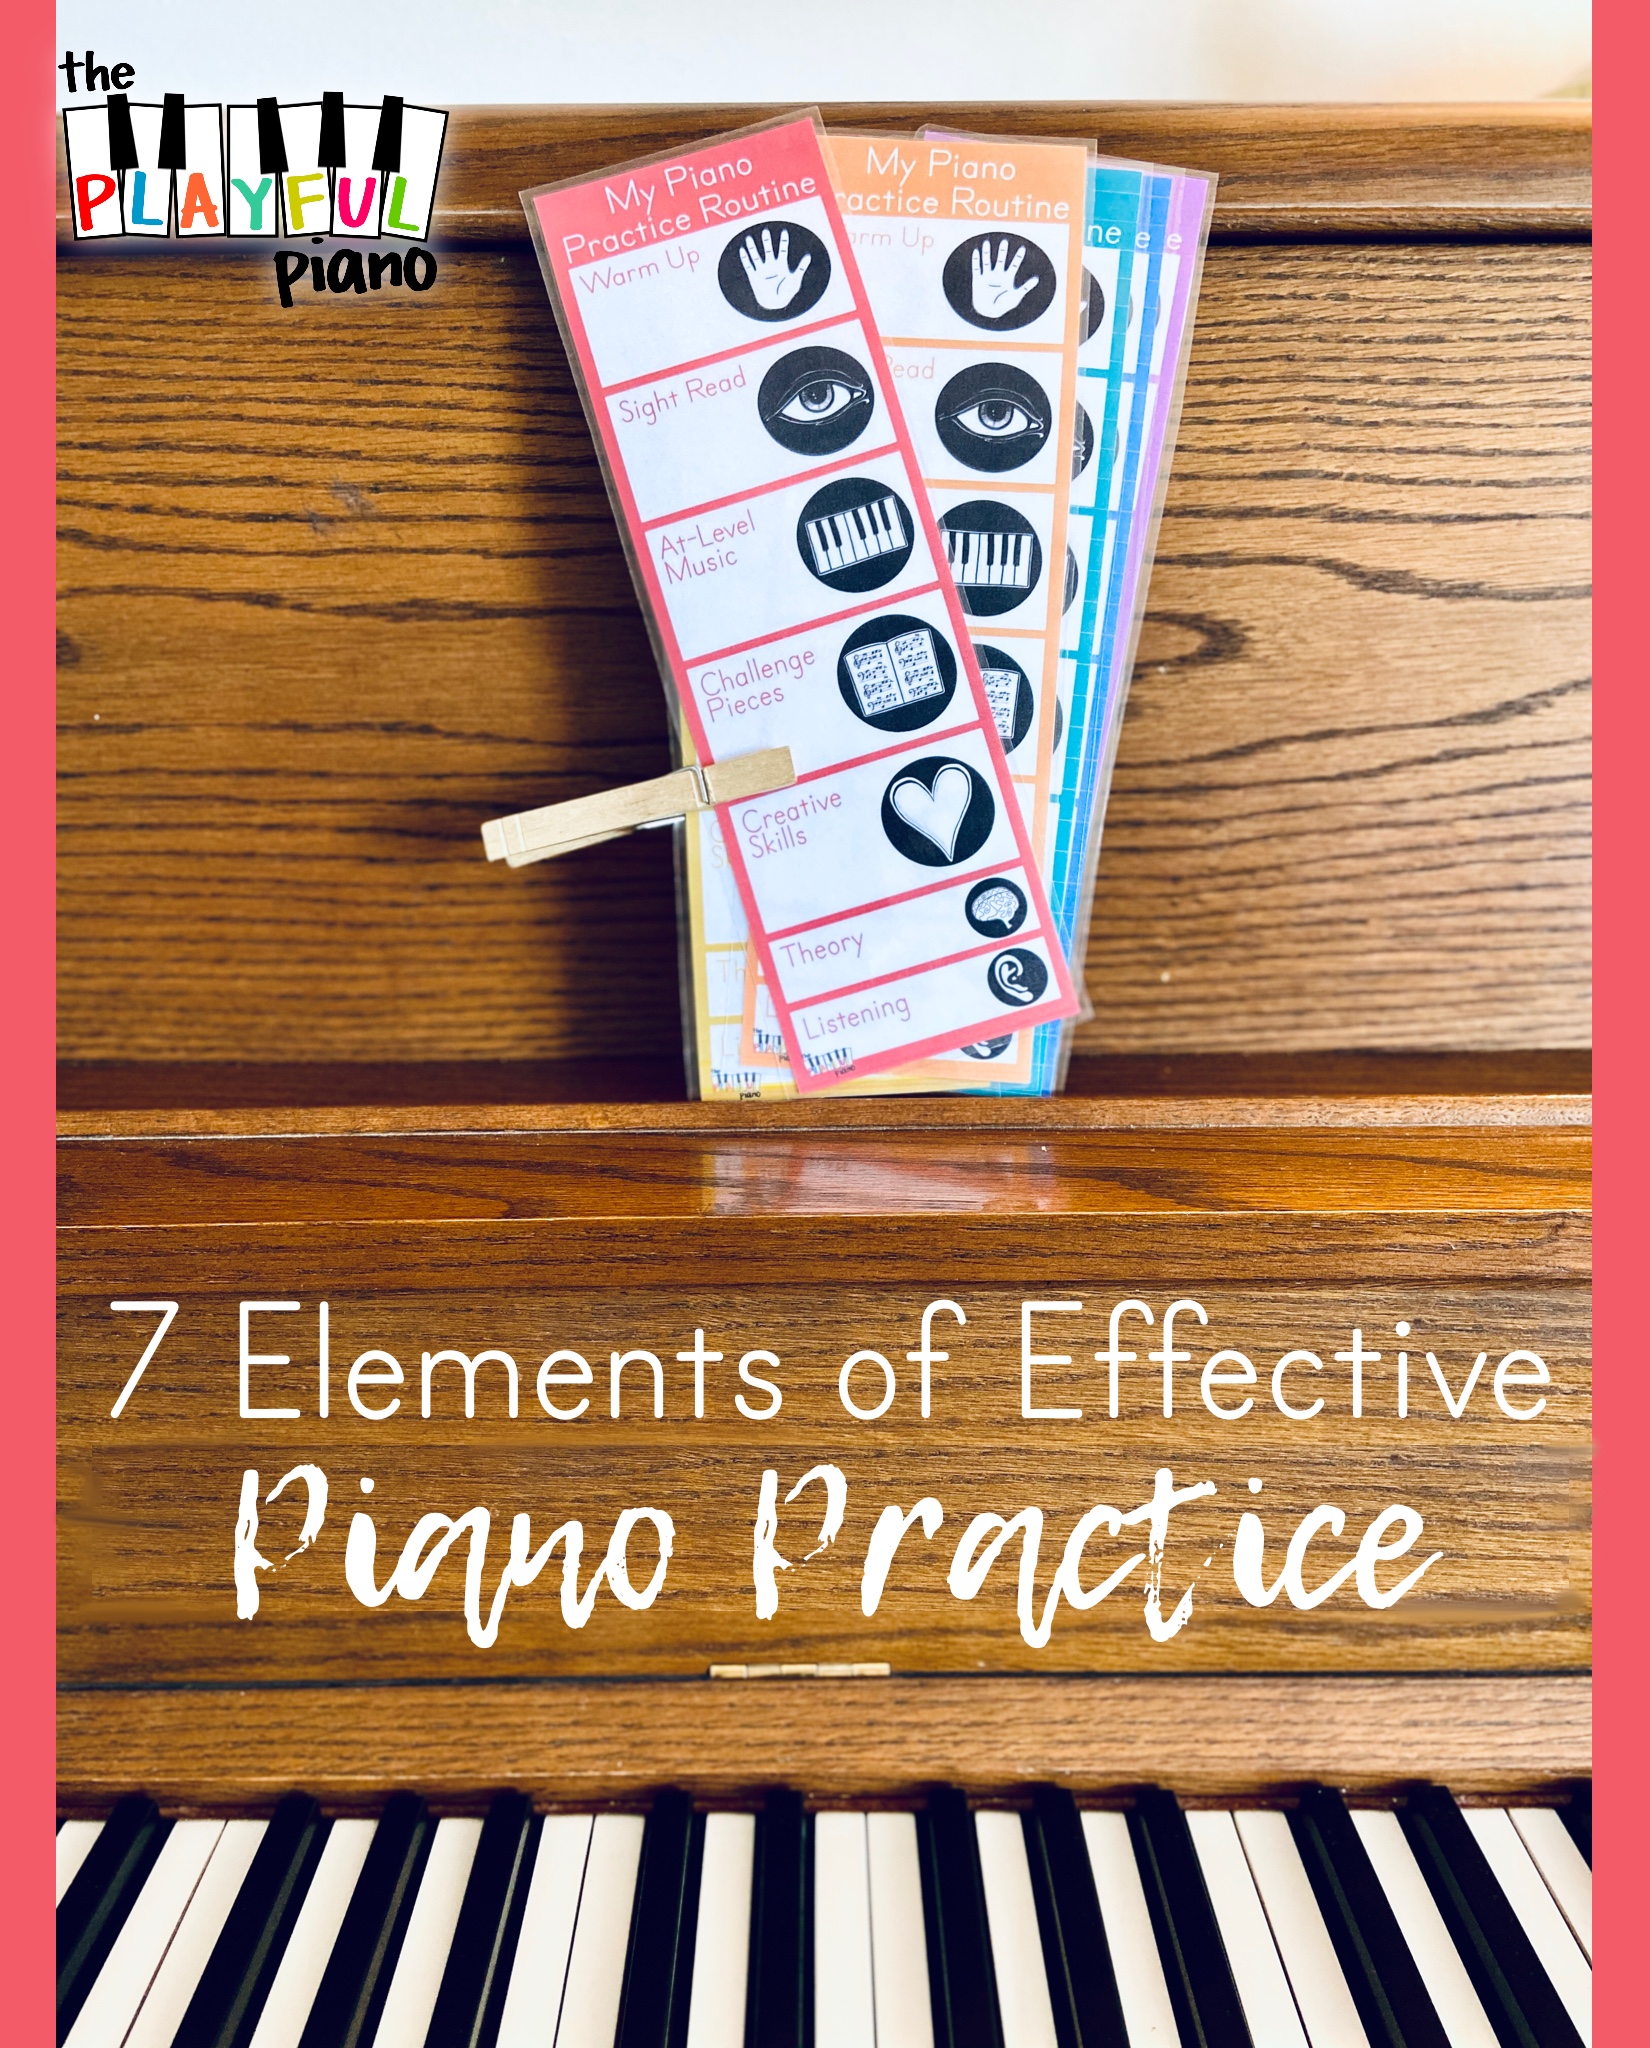 Anguila cráneo patrón 7 Elements of Effective Piano Practice – The Playful Piano